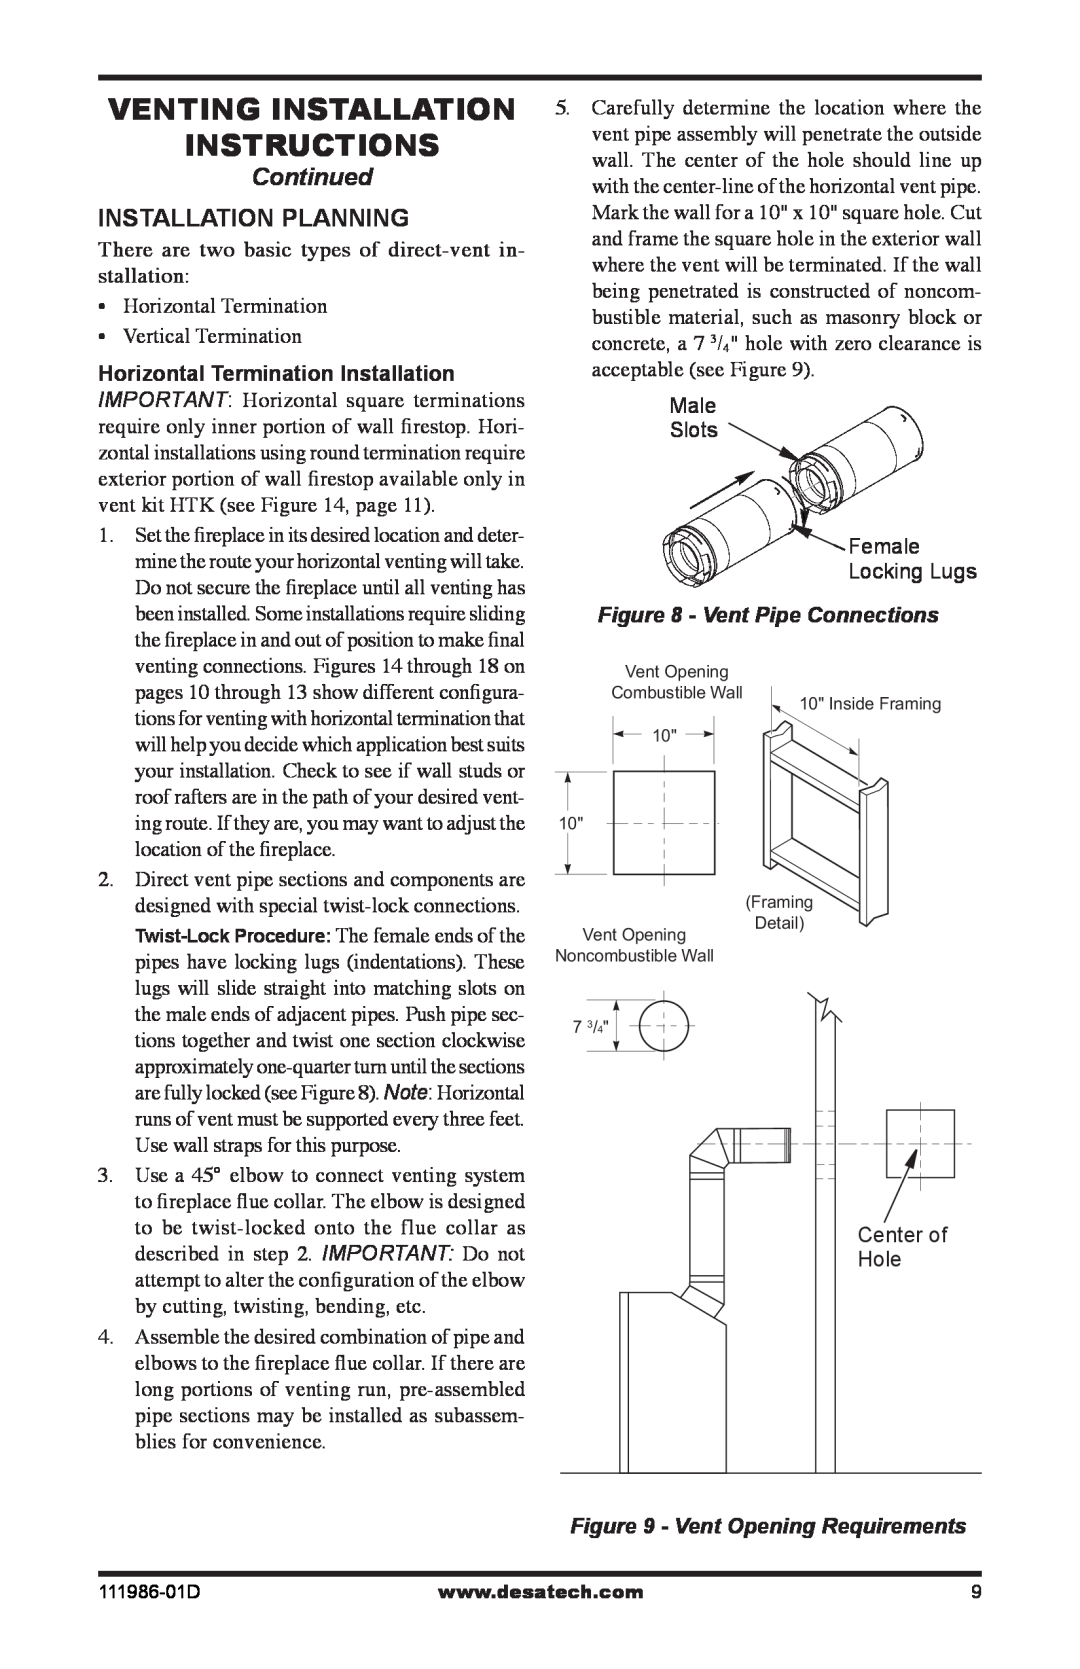 Desa (V)T32P SERIES Venting Installation instructions, Continued, Installation Planning, Vent Pipe Connections 